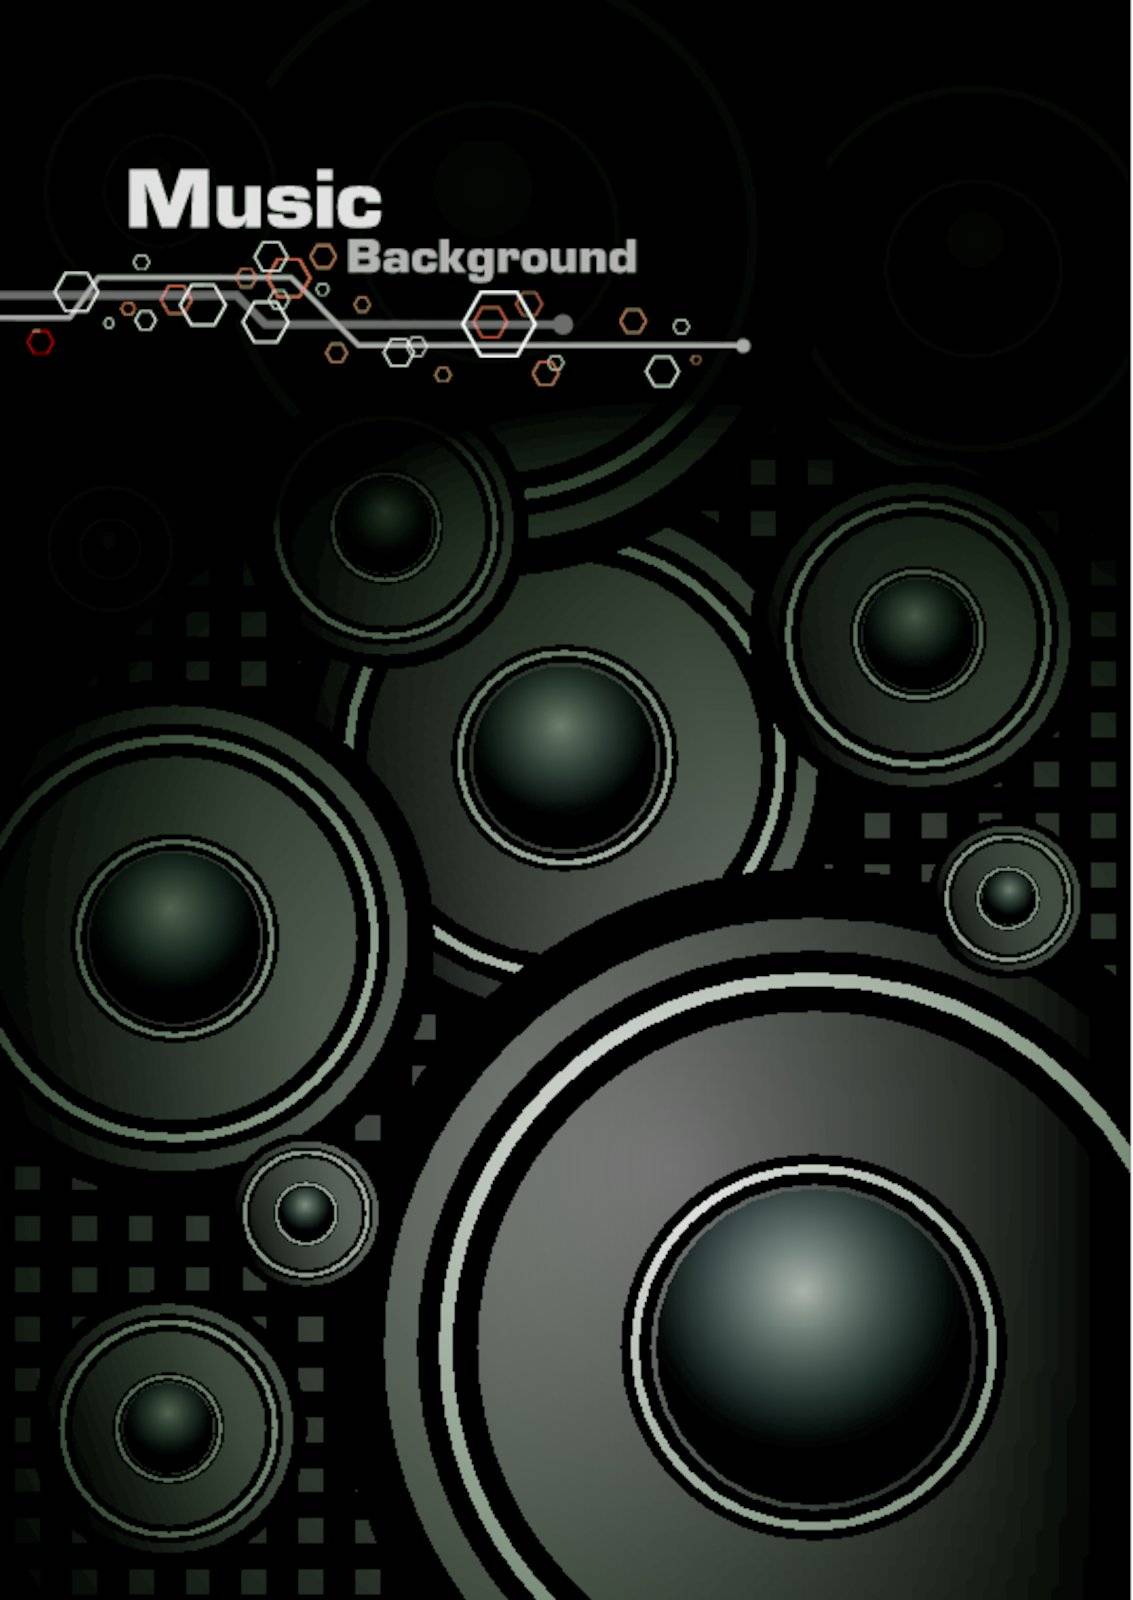 Music background design by Myimagine